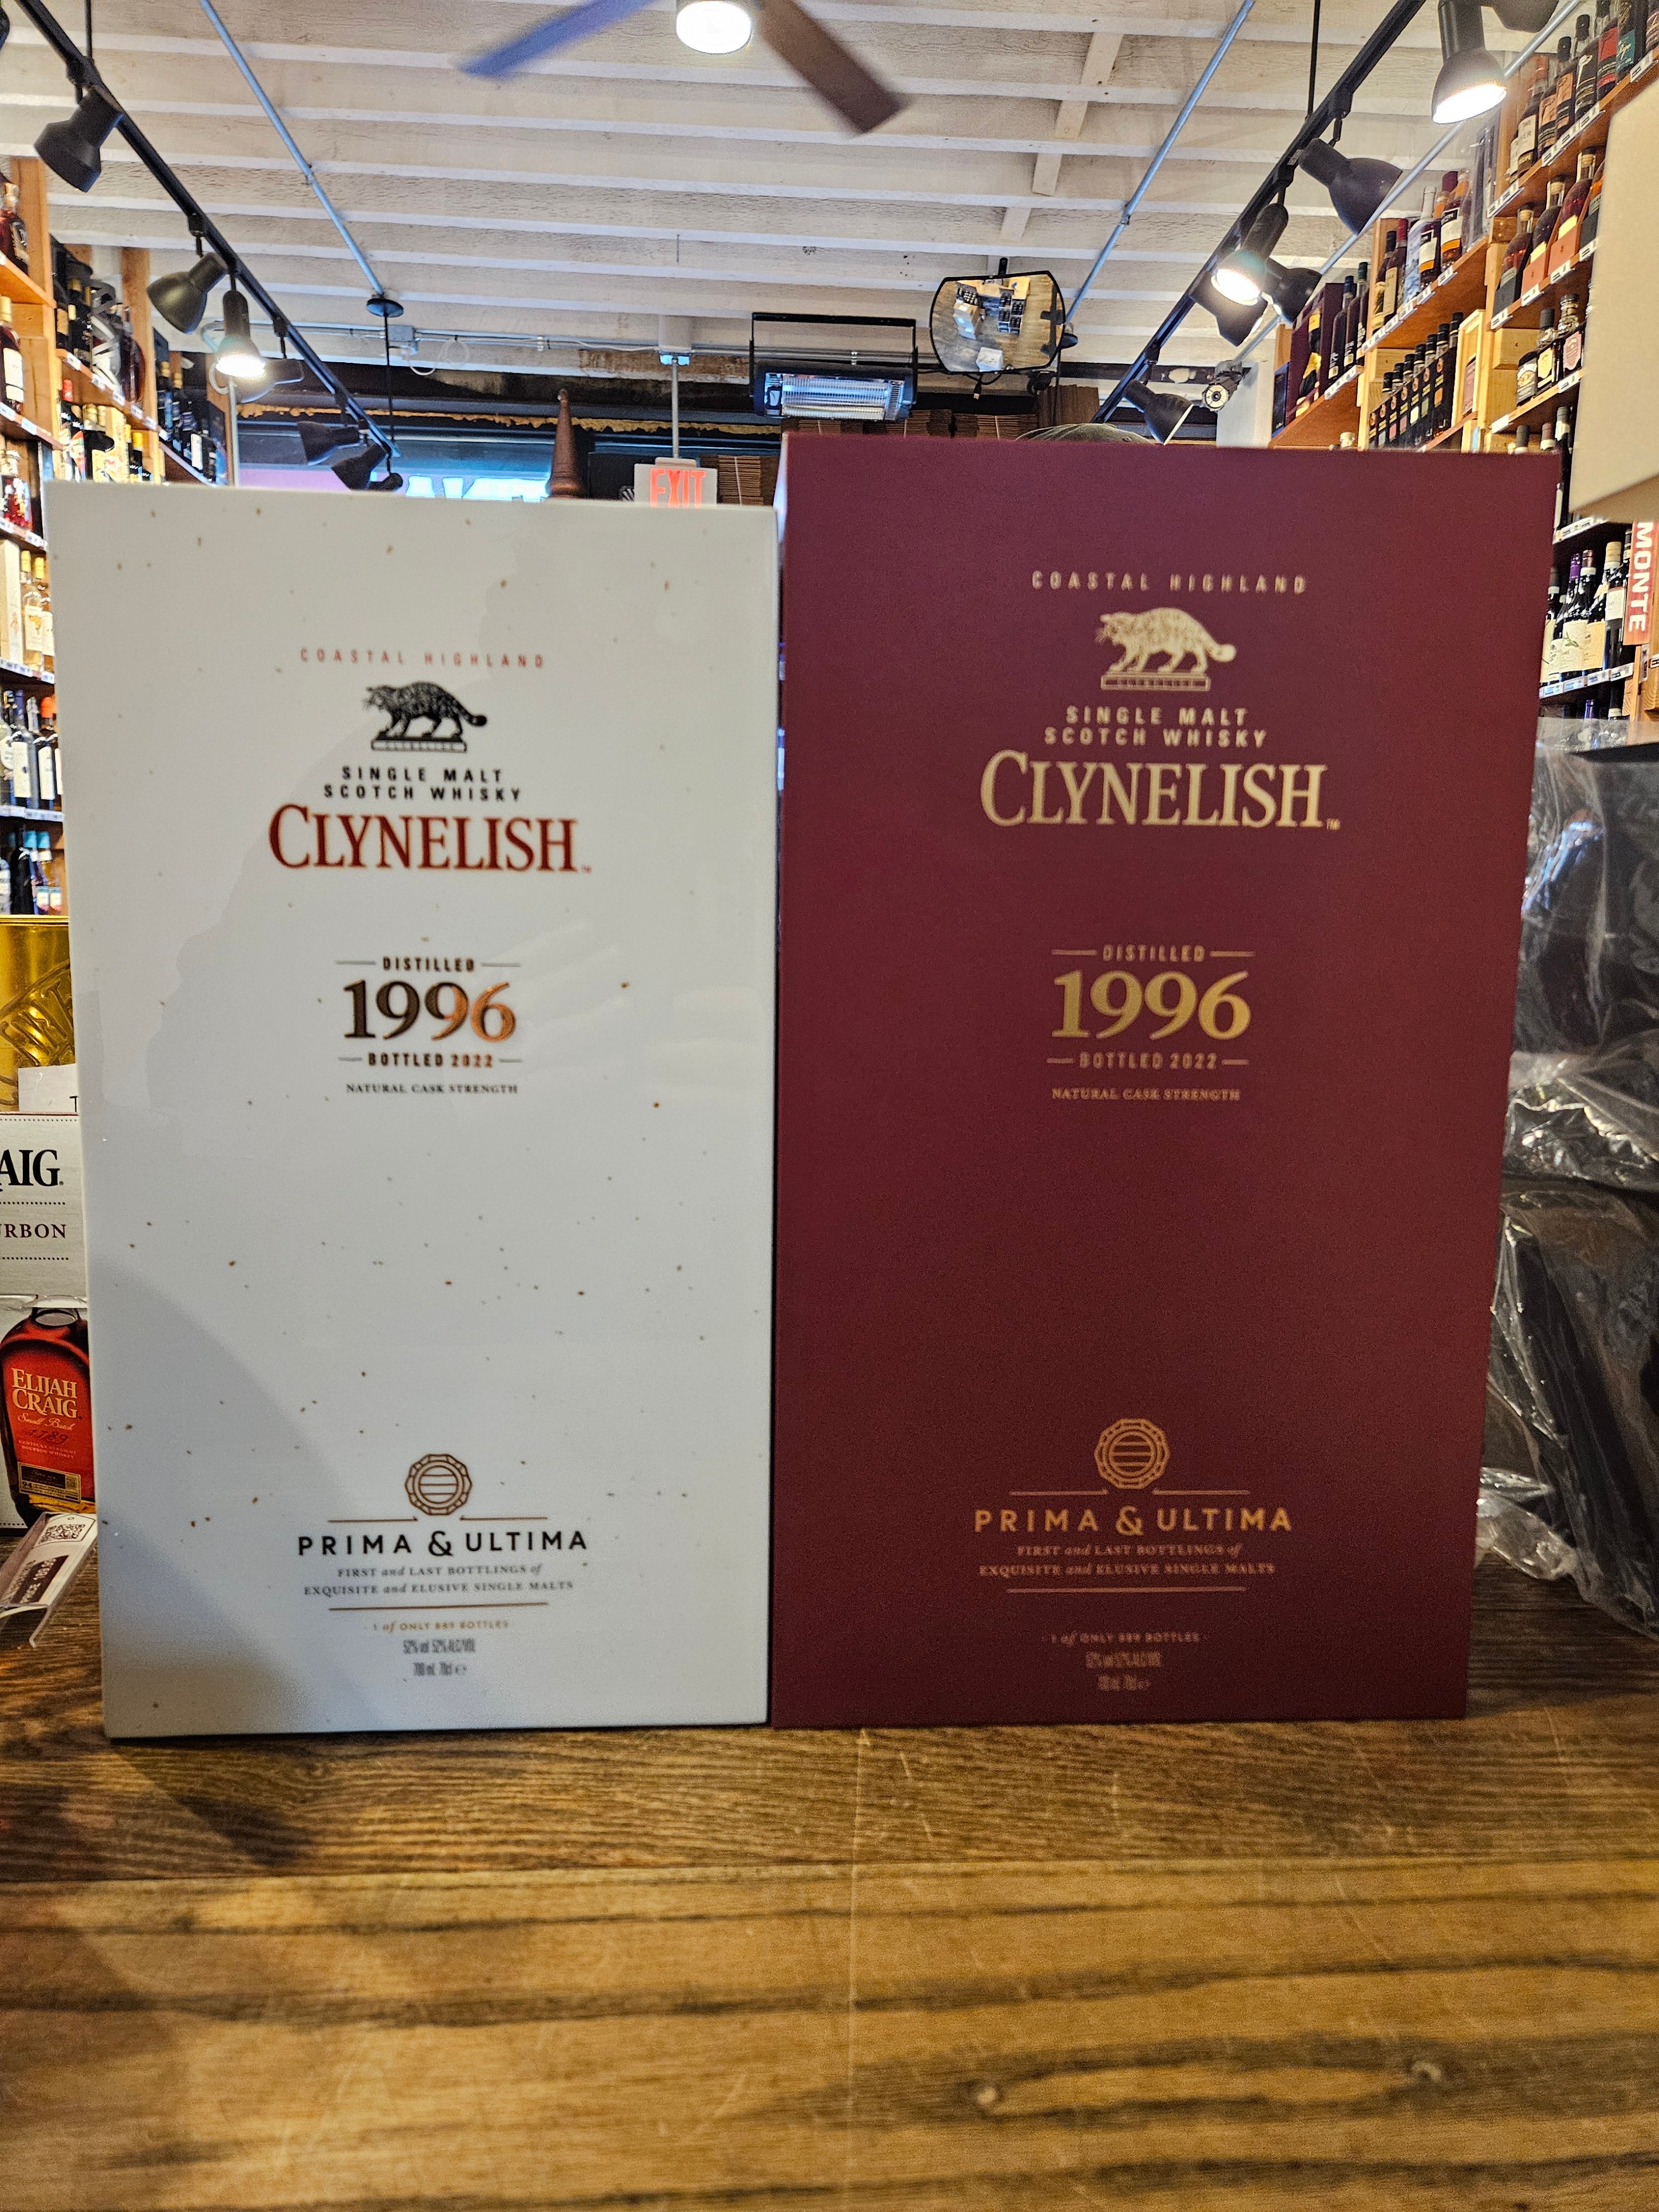 Clynelish 1996 Single Malt Scotch Whisky Prima and Ultima Fourth Release two boxes side by side with the same gold lettering. the box on the left shorter and white, the box on the right is larger and red